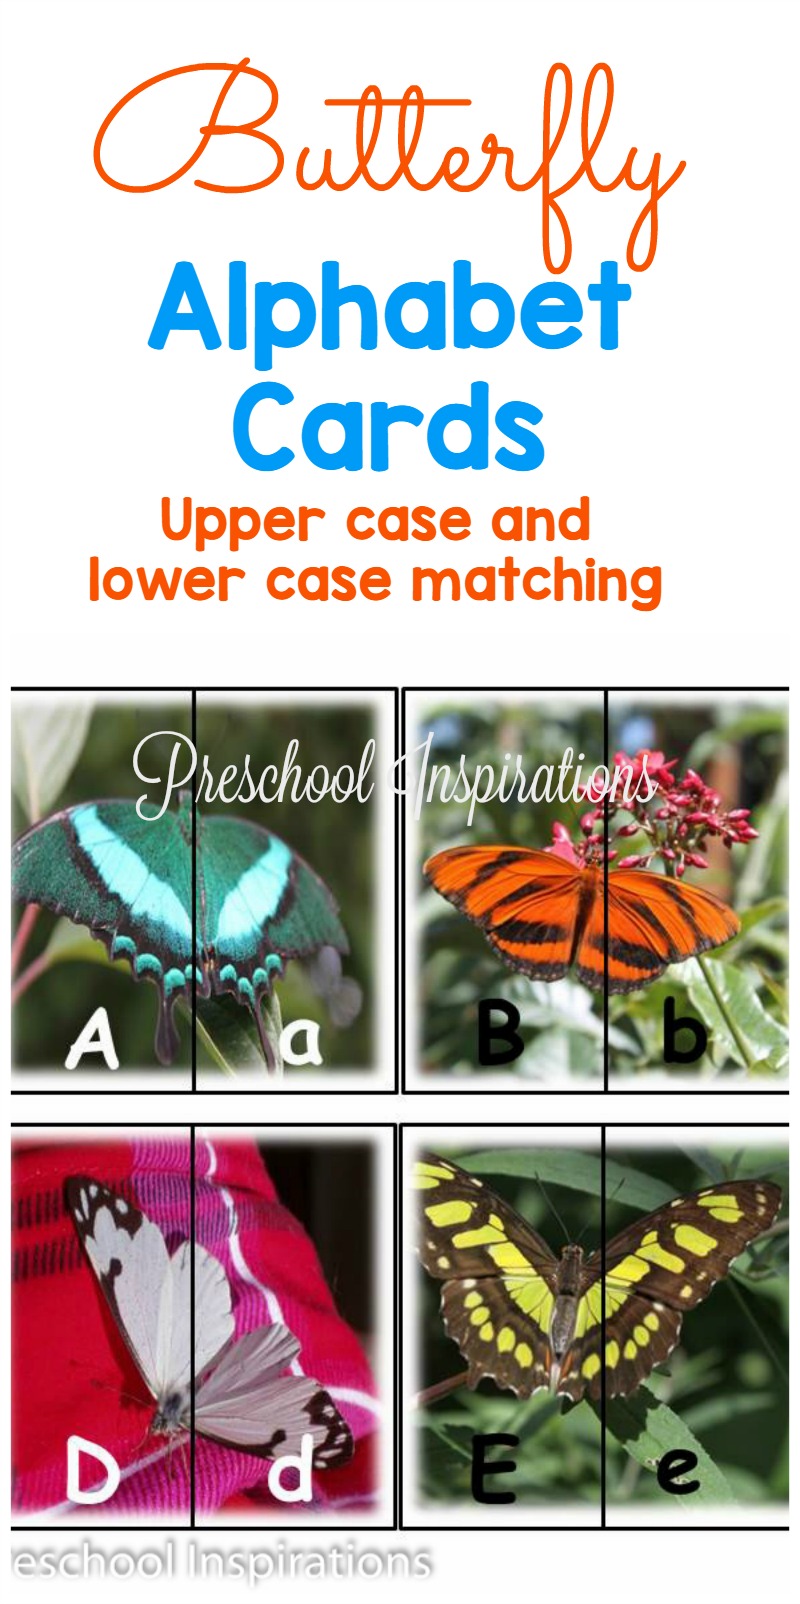 Butterfly alphabet cards to match upper and lower case letters